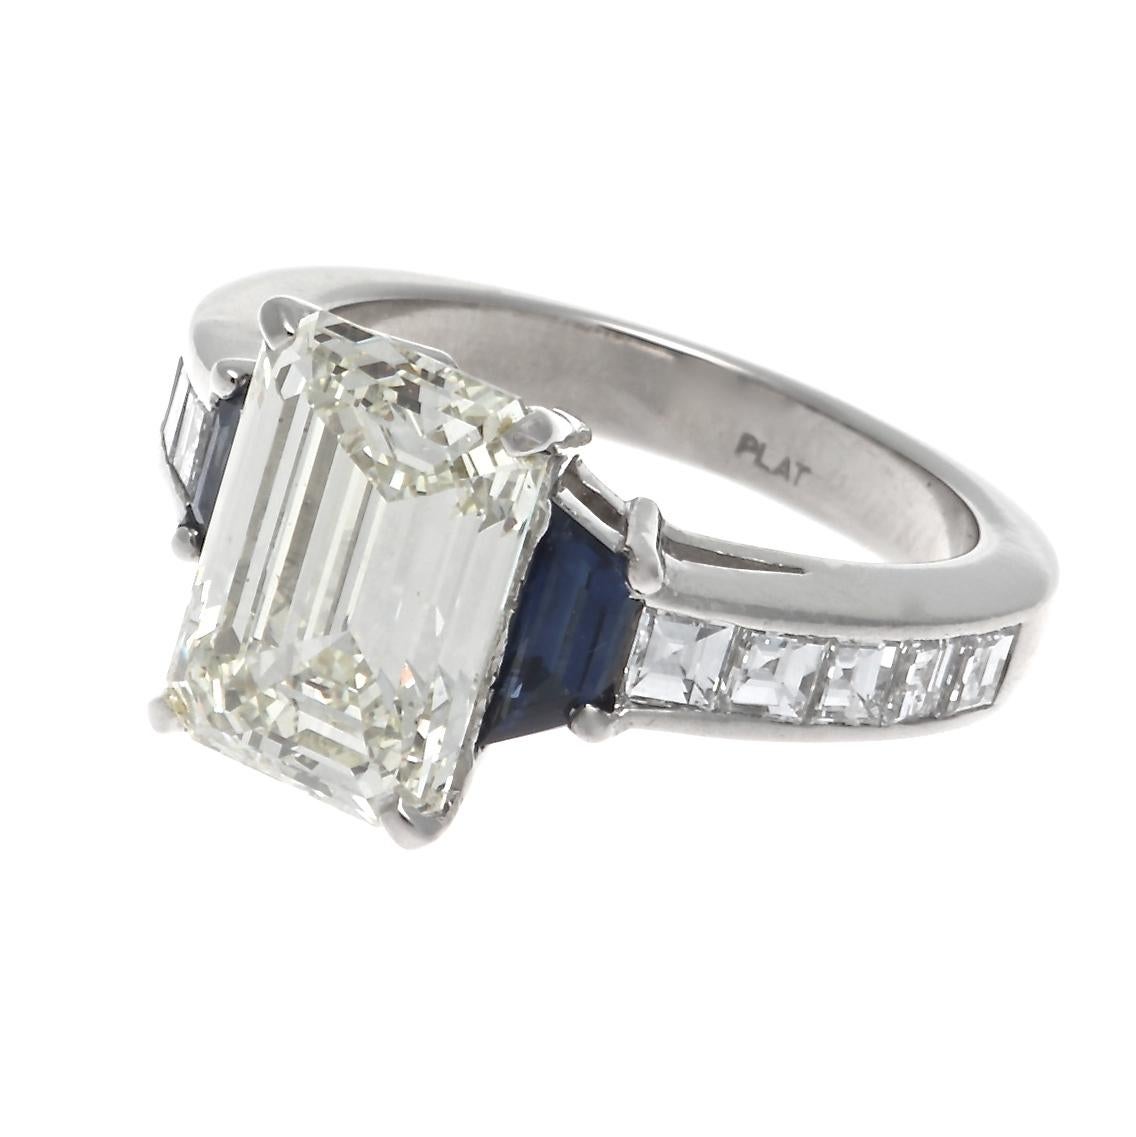 It's all champagne and sunshine with this GIA 3.44 carat O-P color, VS2 prong set emerald cut diamond ring. Framed by two perfectly suited faceted trapezoid cut sapphires and channel set square emerald cuts on the platinum band. Size 5 1/2, sizing